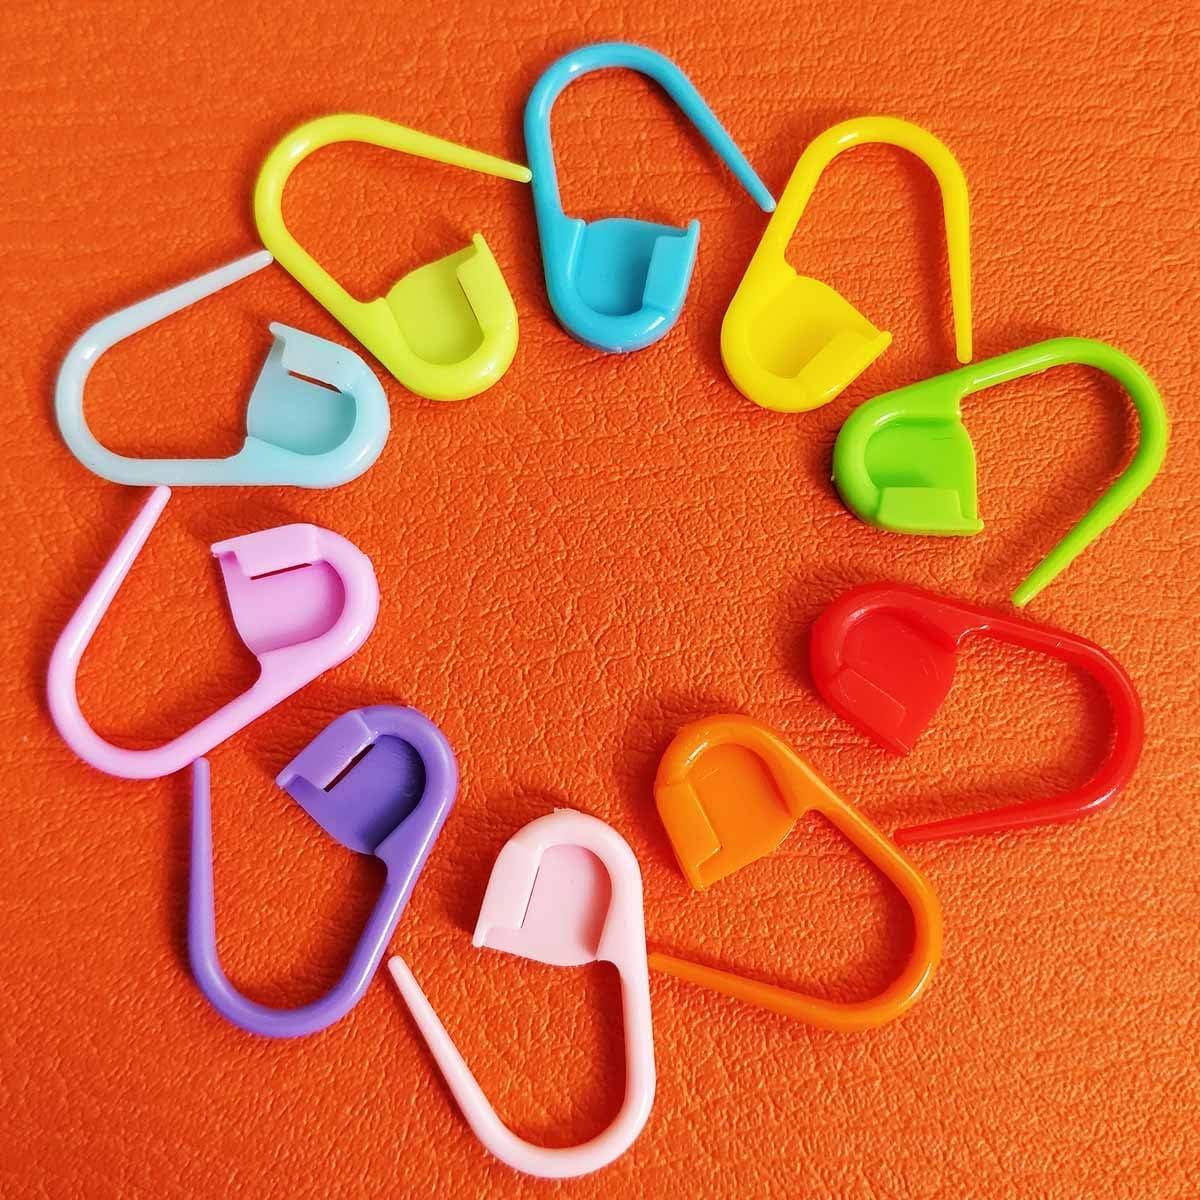 100 PCS Crochet Stitch Markers, Colorful Locking Stitch Markers Plastic  Crochet Stitch Counters Crochet Clips for Weaving, Sewing and Knitting DIY  Craft 